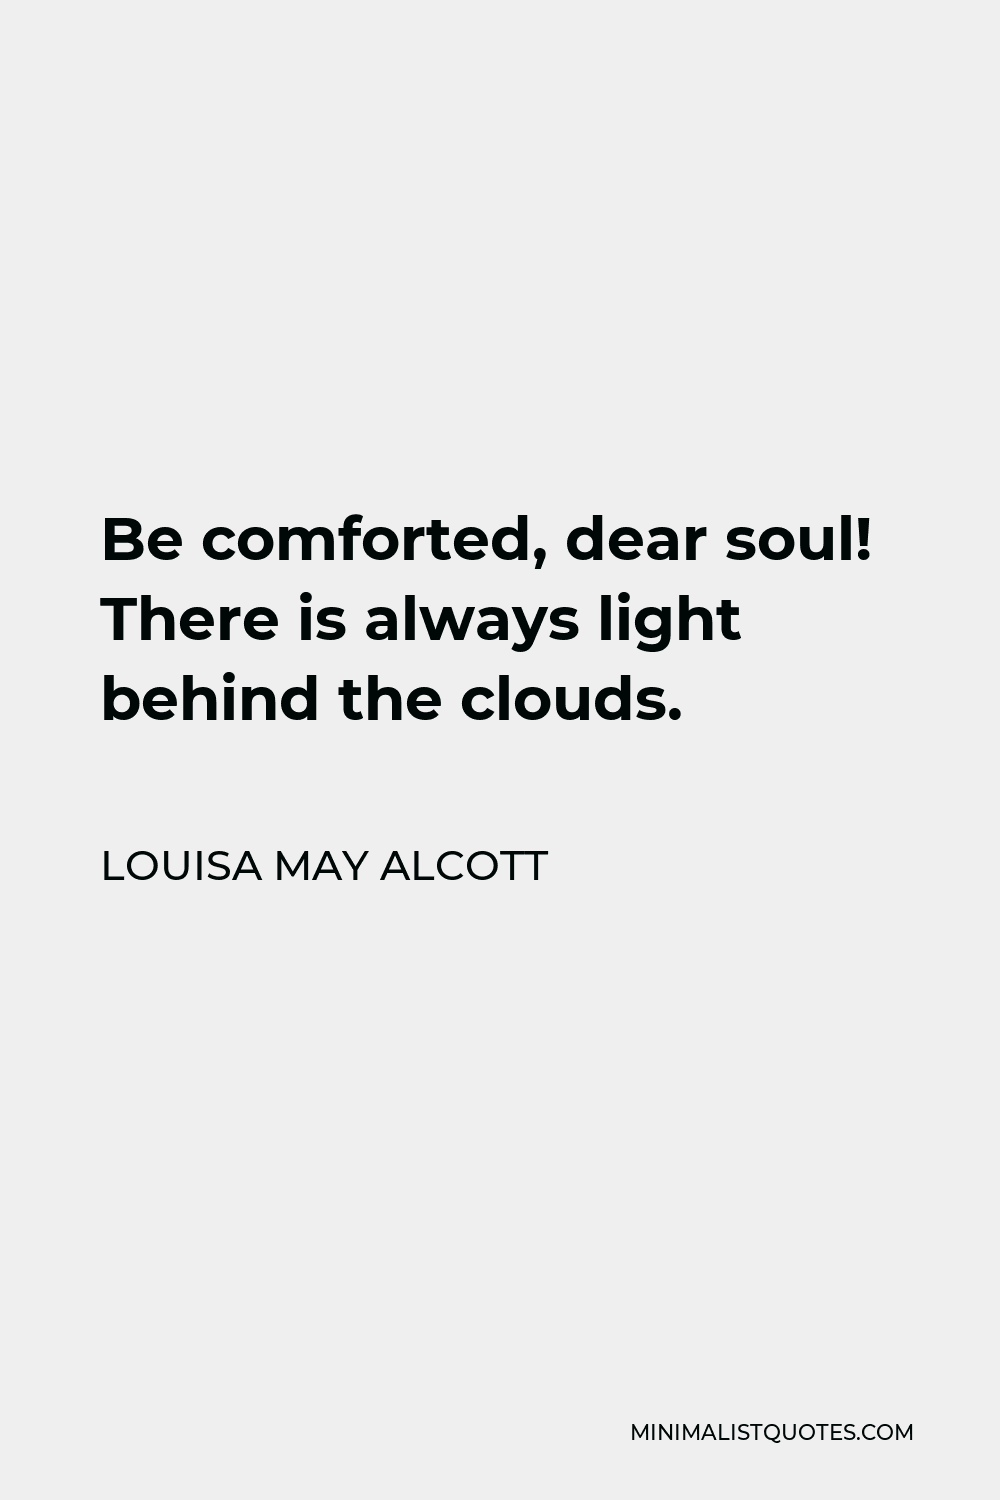 Louisa May Alcott Quote Be Comforted Dear Soul There Is Always Light Behind The Clouds